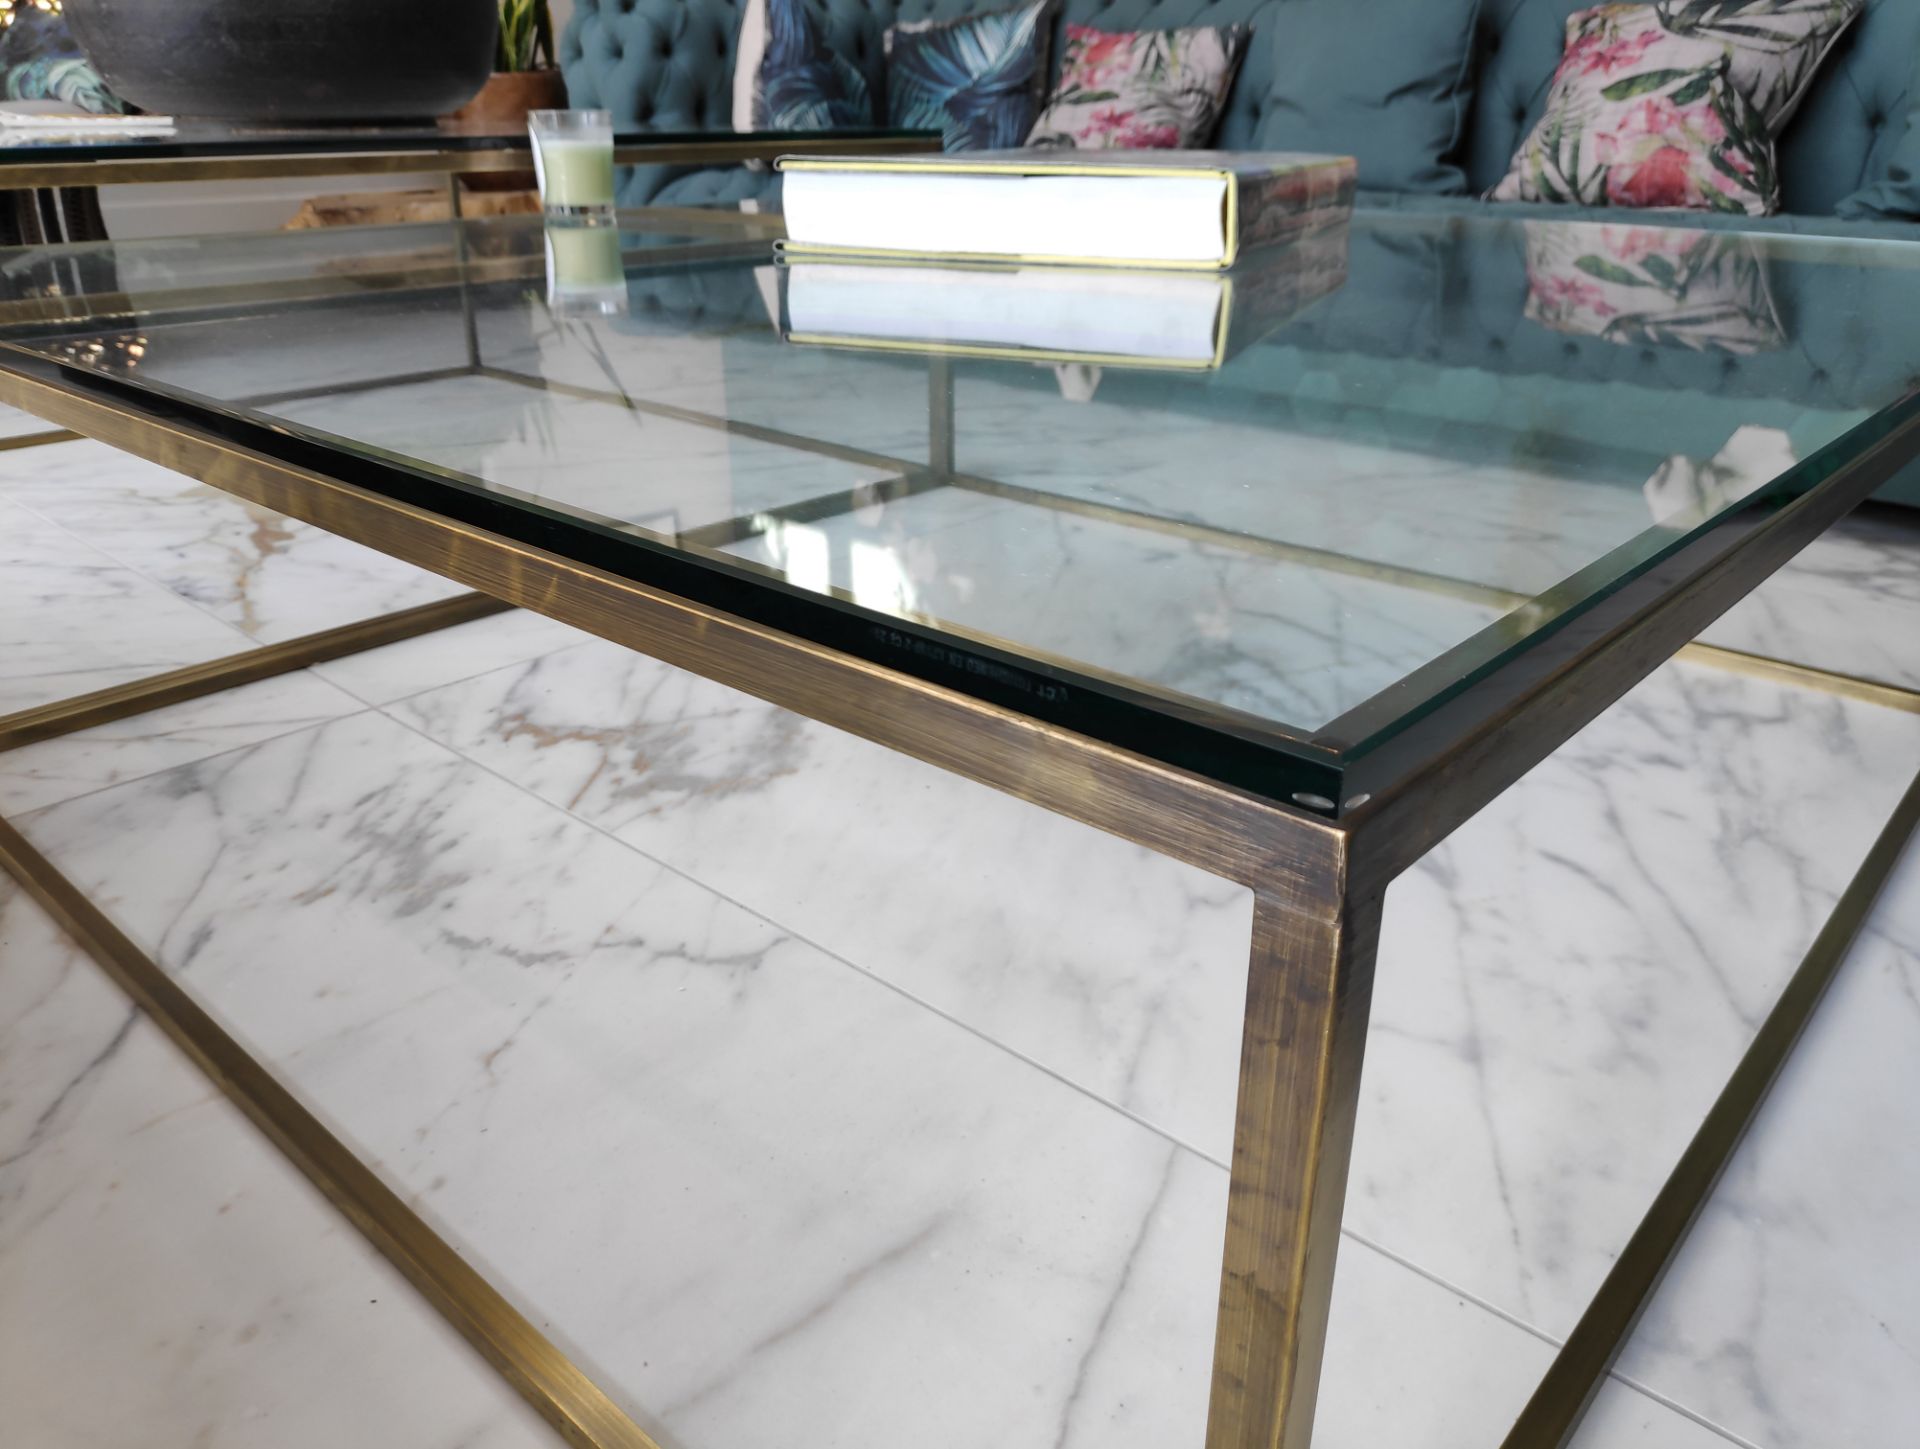 1 x Large 2-Tier Glass Coffee Table with Metal Frame - Dimensions: W240 x D120 x H45.5 cm - - Image 8 of 14